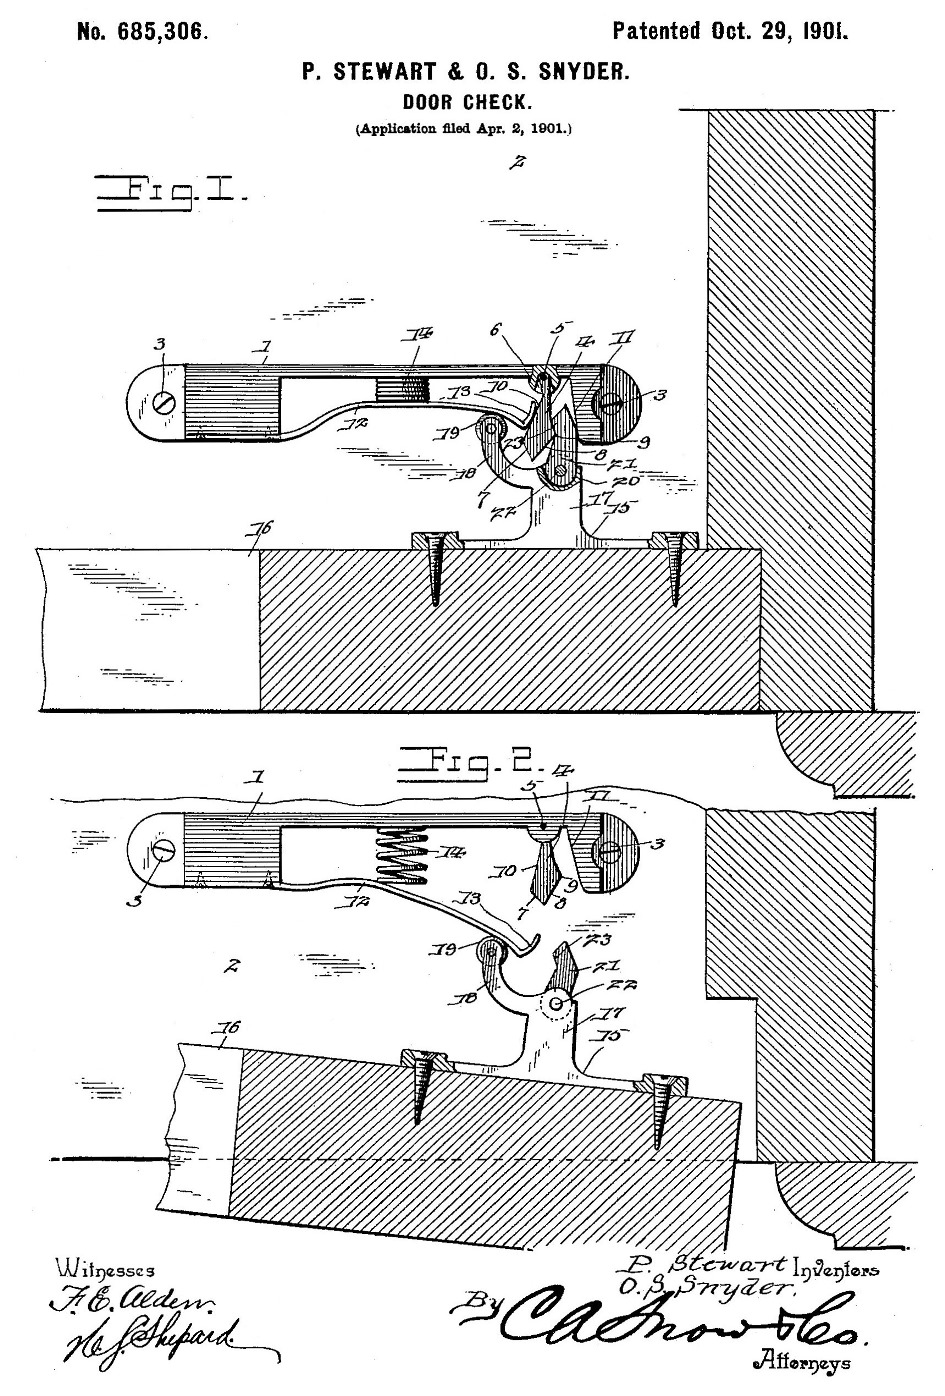 Perry Stewart, O. S. Snyder Patent 1901